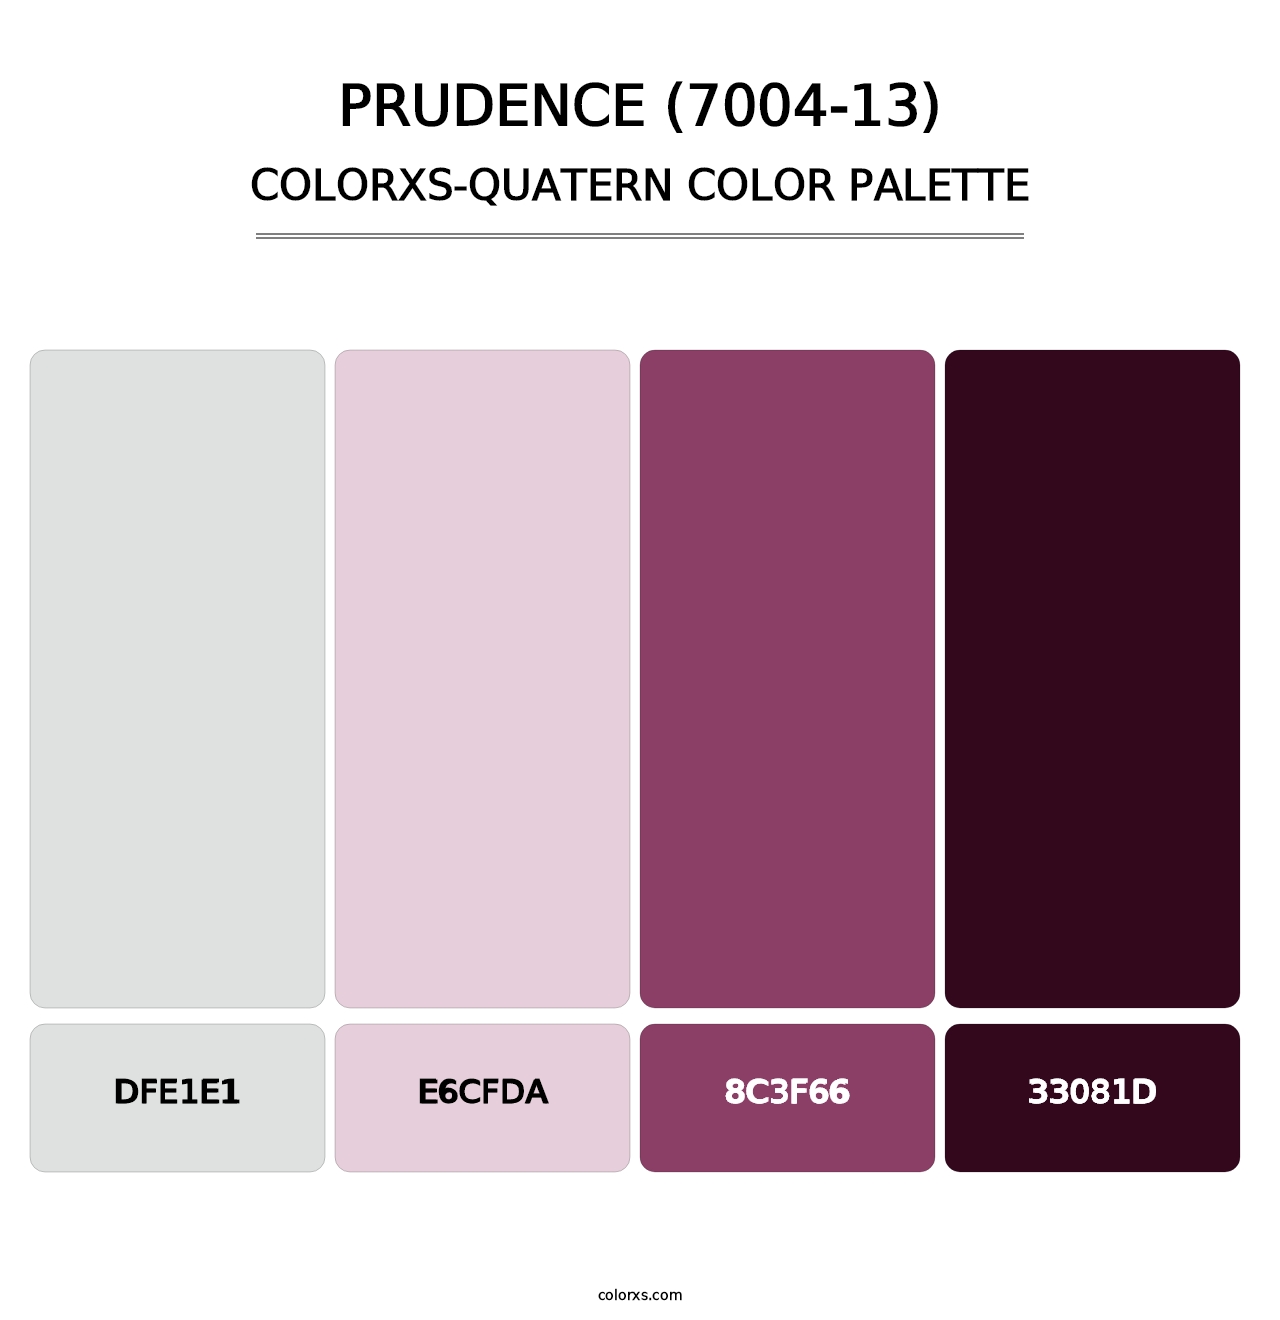 Prudence (7004-13) - Colorxs Quatern Palette